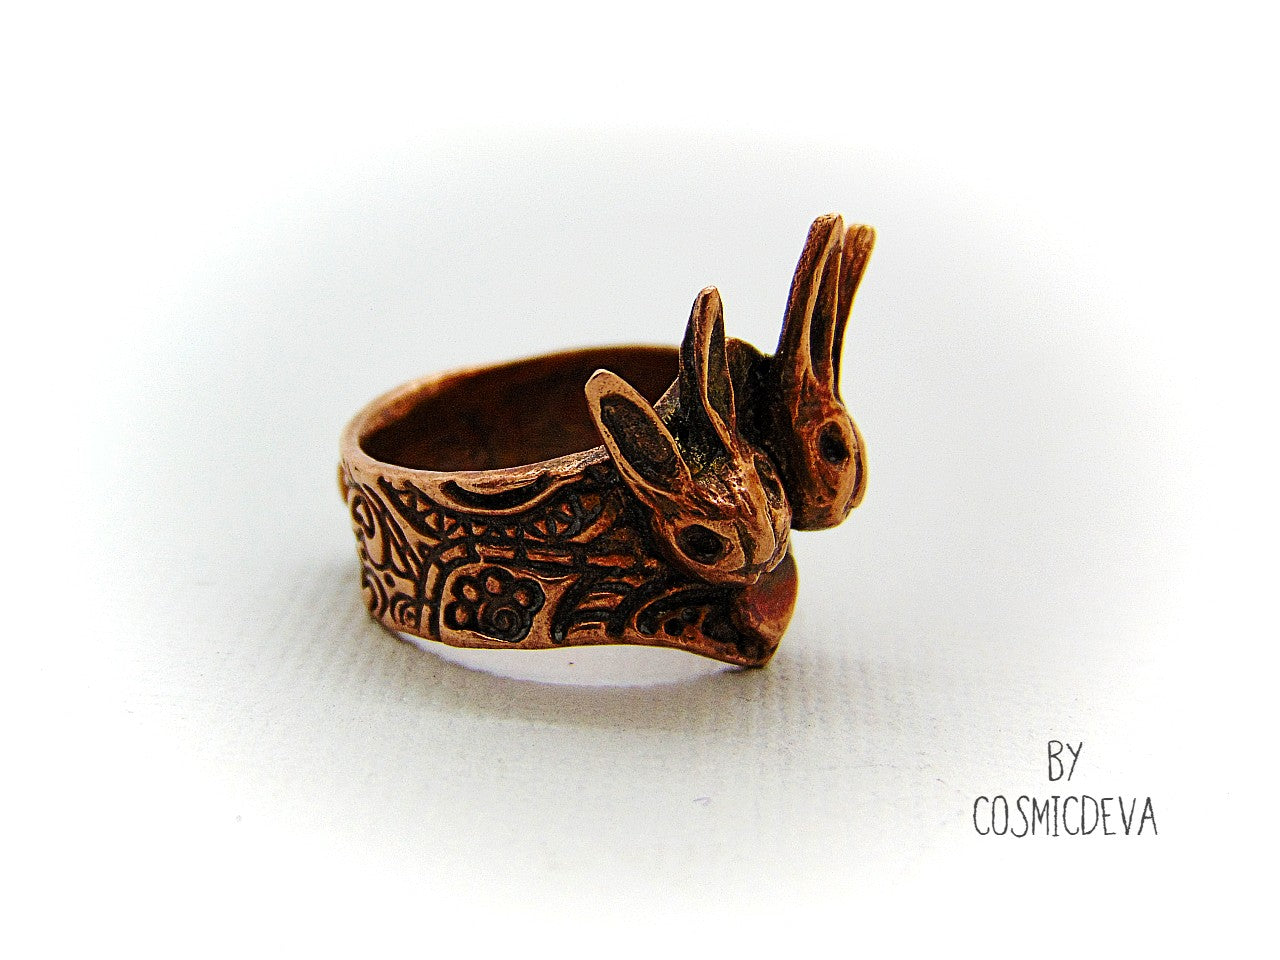 Love bunnies? Show your devotion with this gorgeous Copper Bunny Love Ring! Crafted by hand, it features two snuggled bunny heads with a heart in the middle, plus a textured shank and a heart on the back. One-of-a-kind and unique, this US Size 7.5 Ring is perfect for expressing your style and your bunny appreciation! cosmicdeva